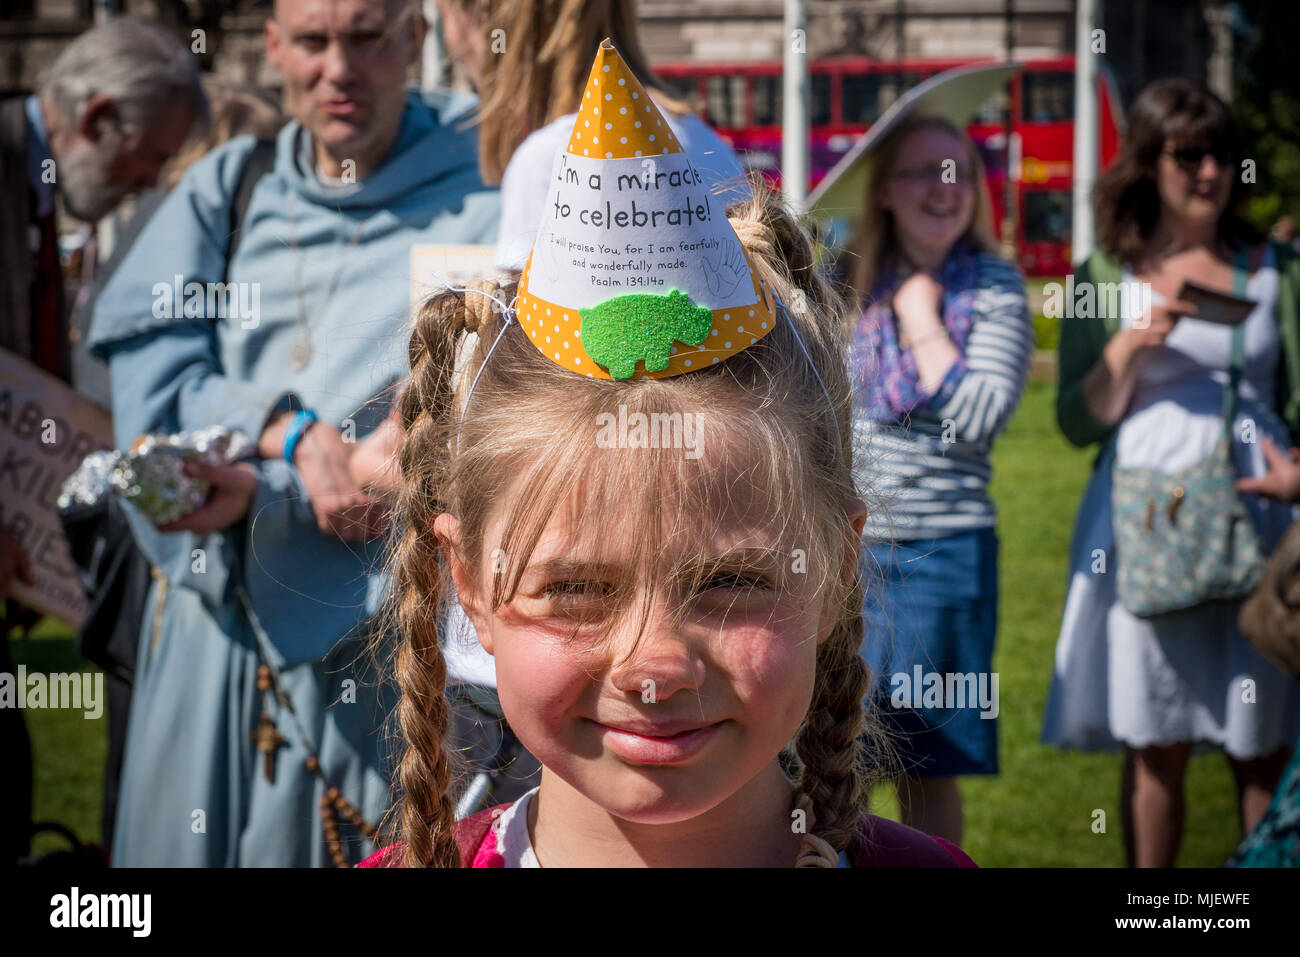 London, UK. 5th May, 2018. Hundreds of people joined March for Life today as counter protest against pro-abortion demo. The marches come just weeks ahead of a referendum in Ireland on the eighth amendment. Credit: Velar Grant/ZUMA Wire/Alamy Live News Stock Photo